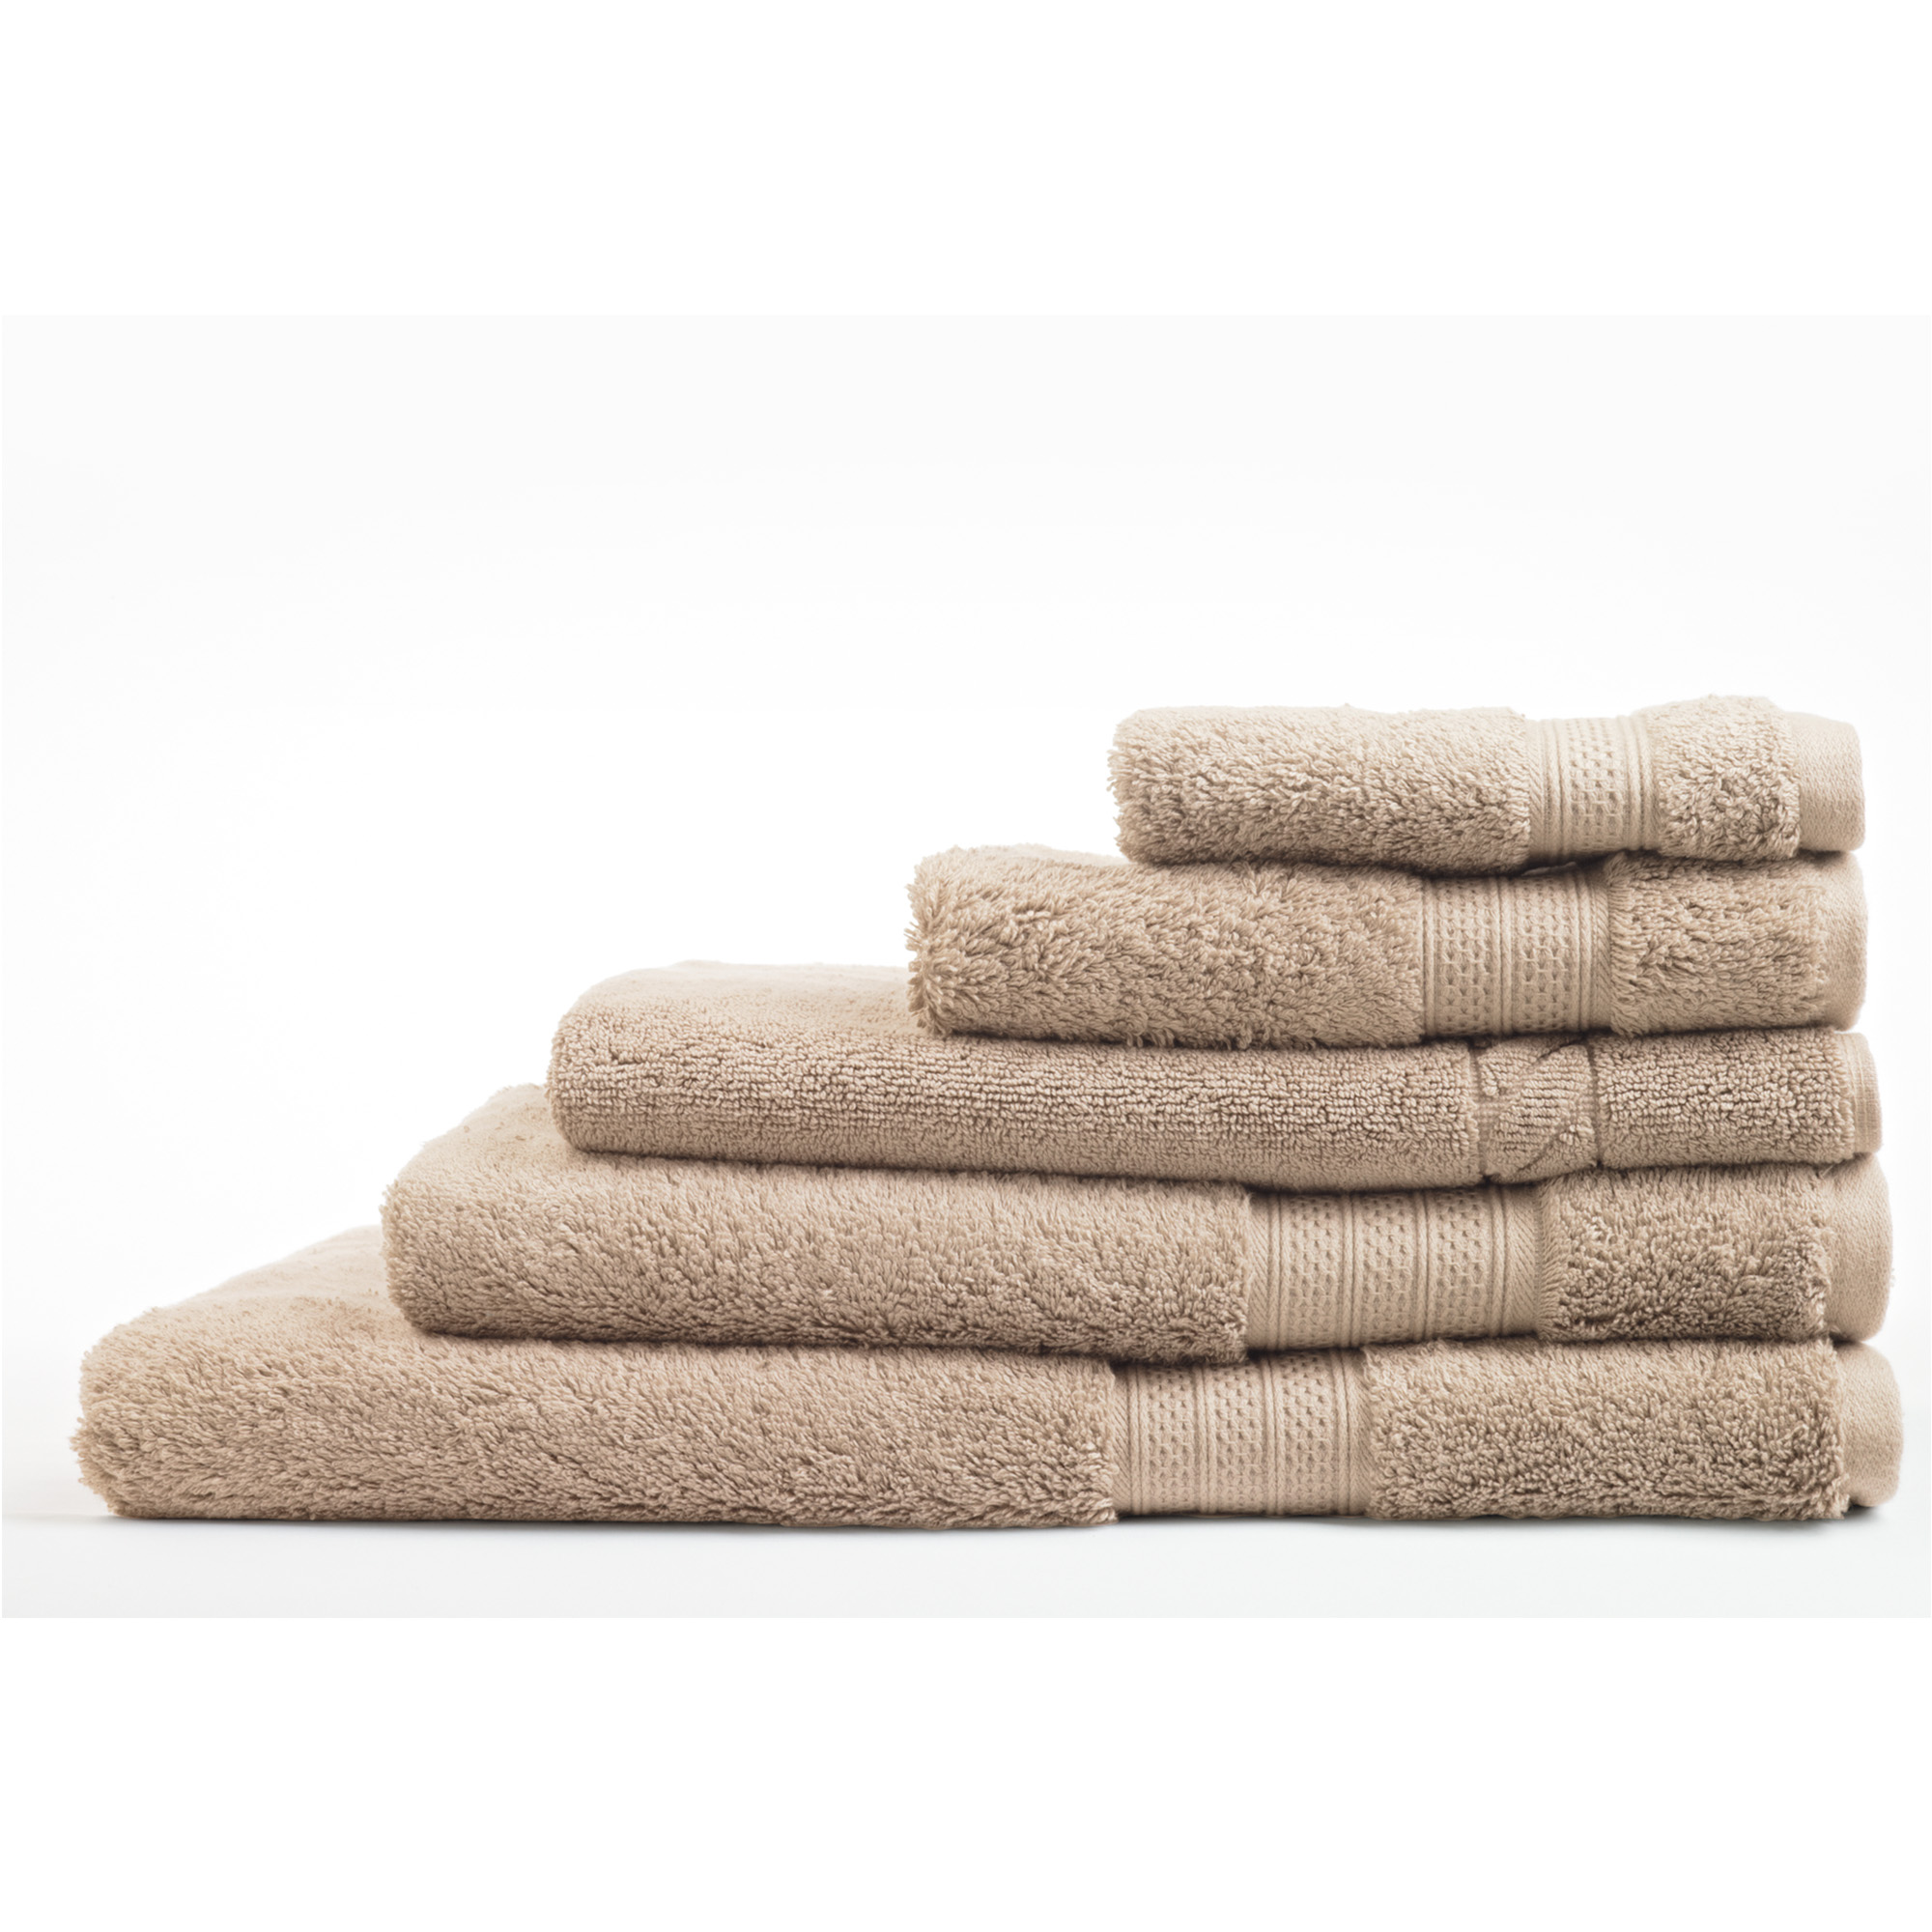 EGYPTIAN LUXURY NATURAL HAND TOWEL